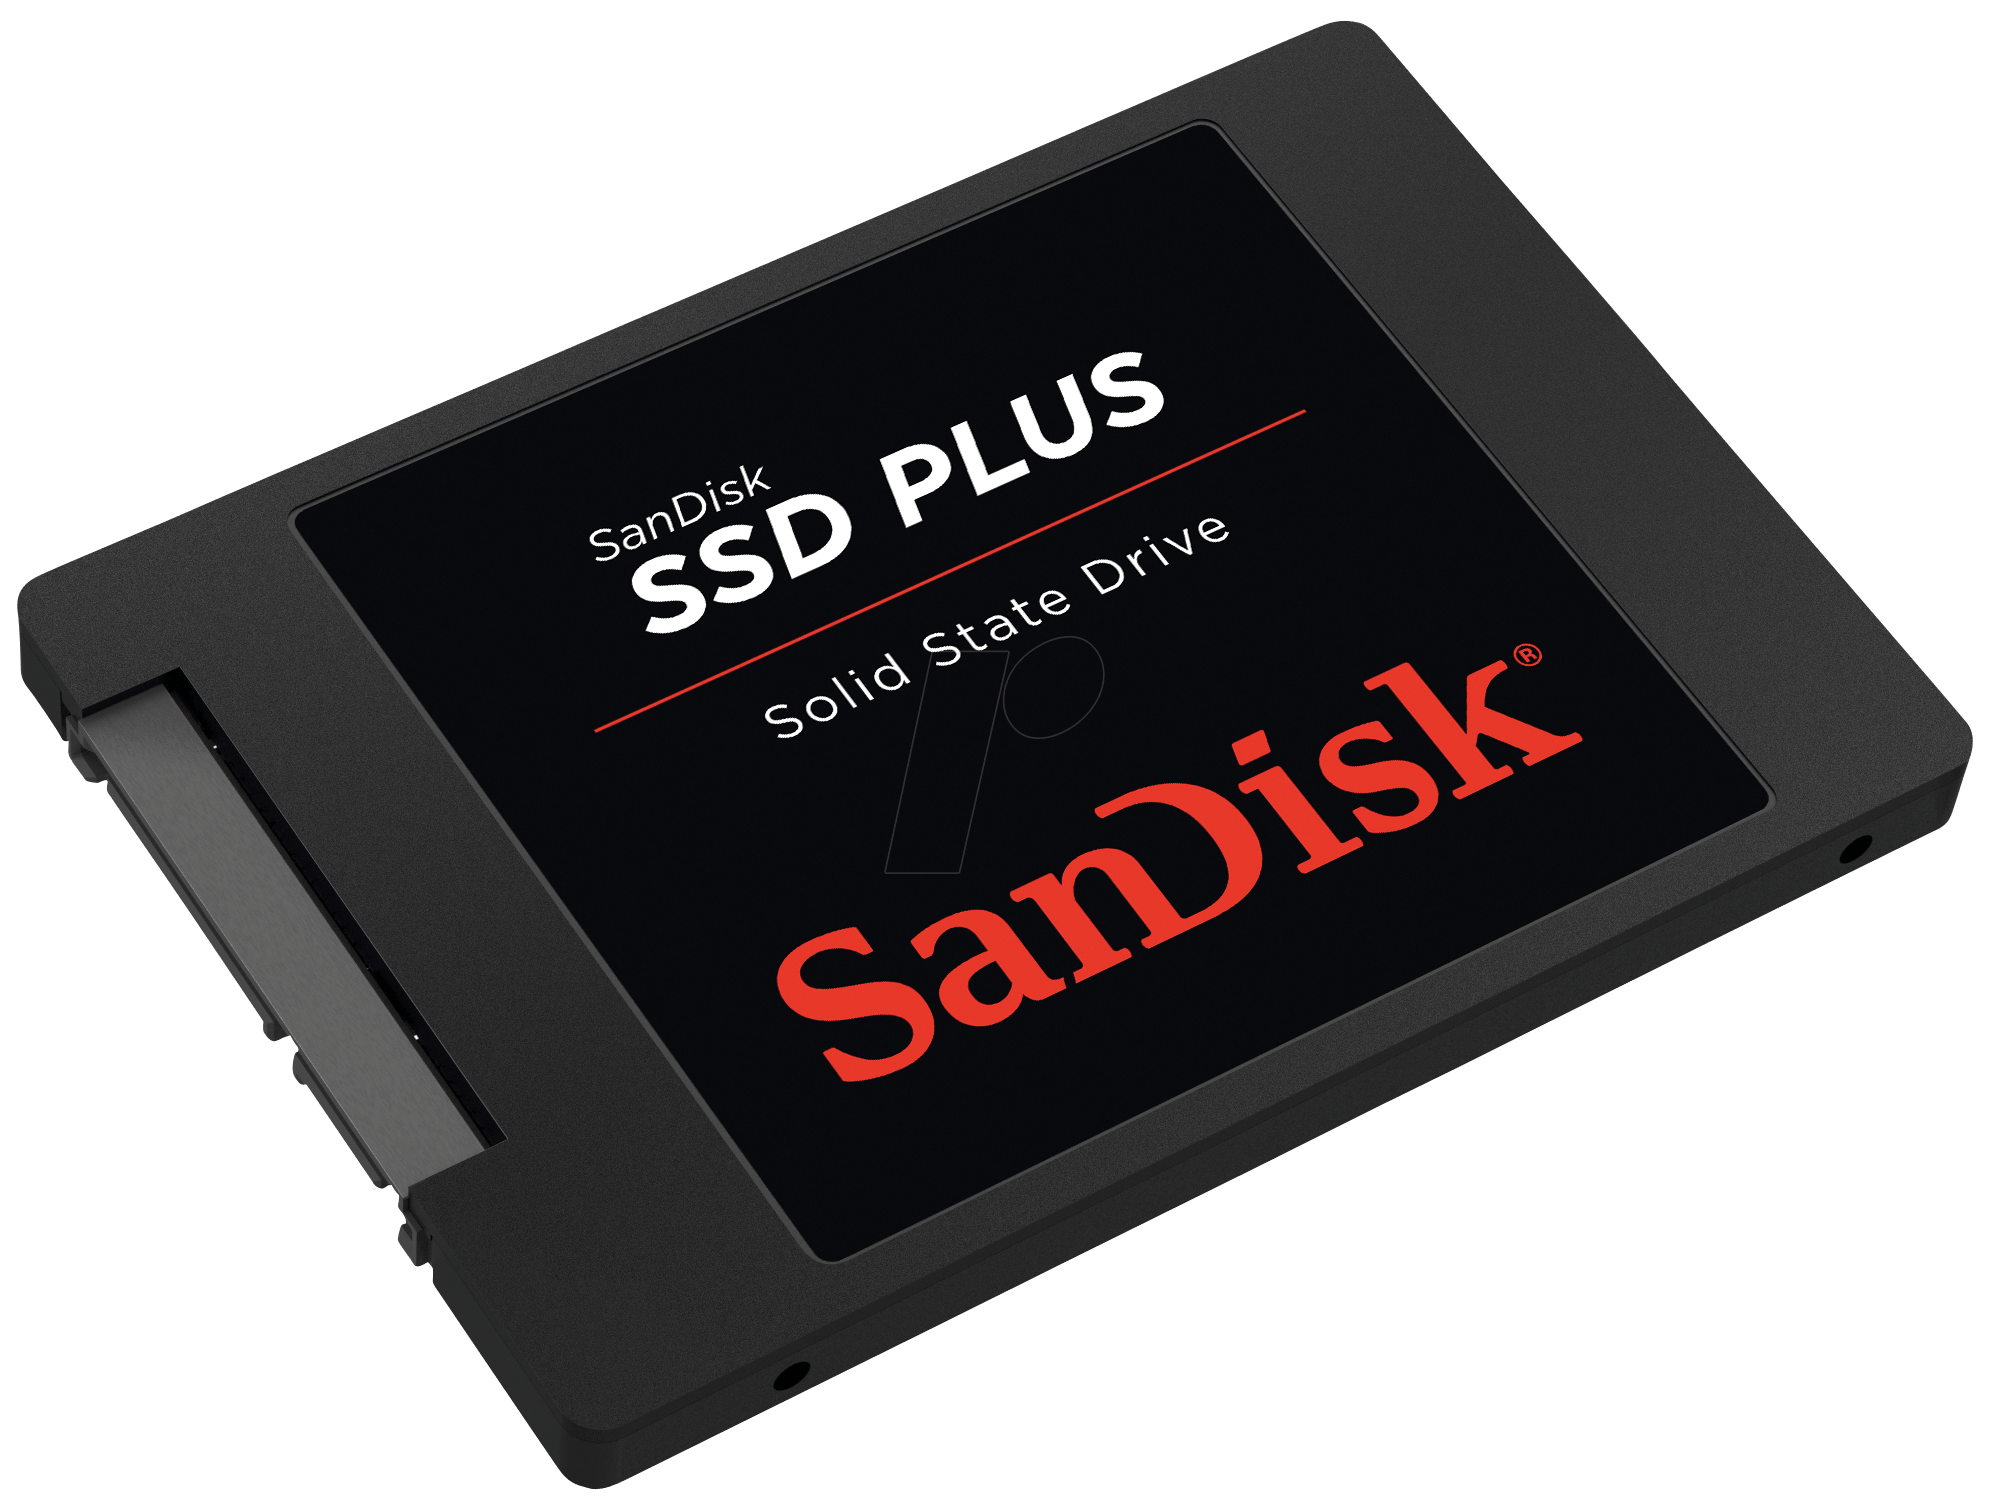 SSD PNG Background Image.